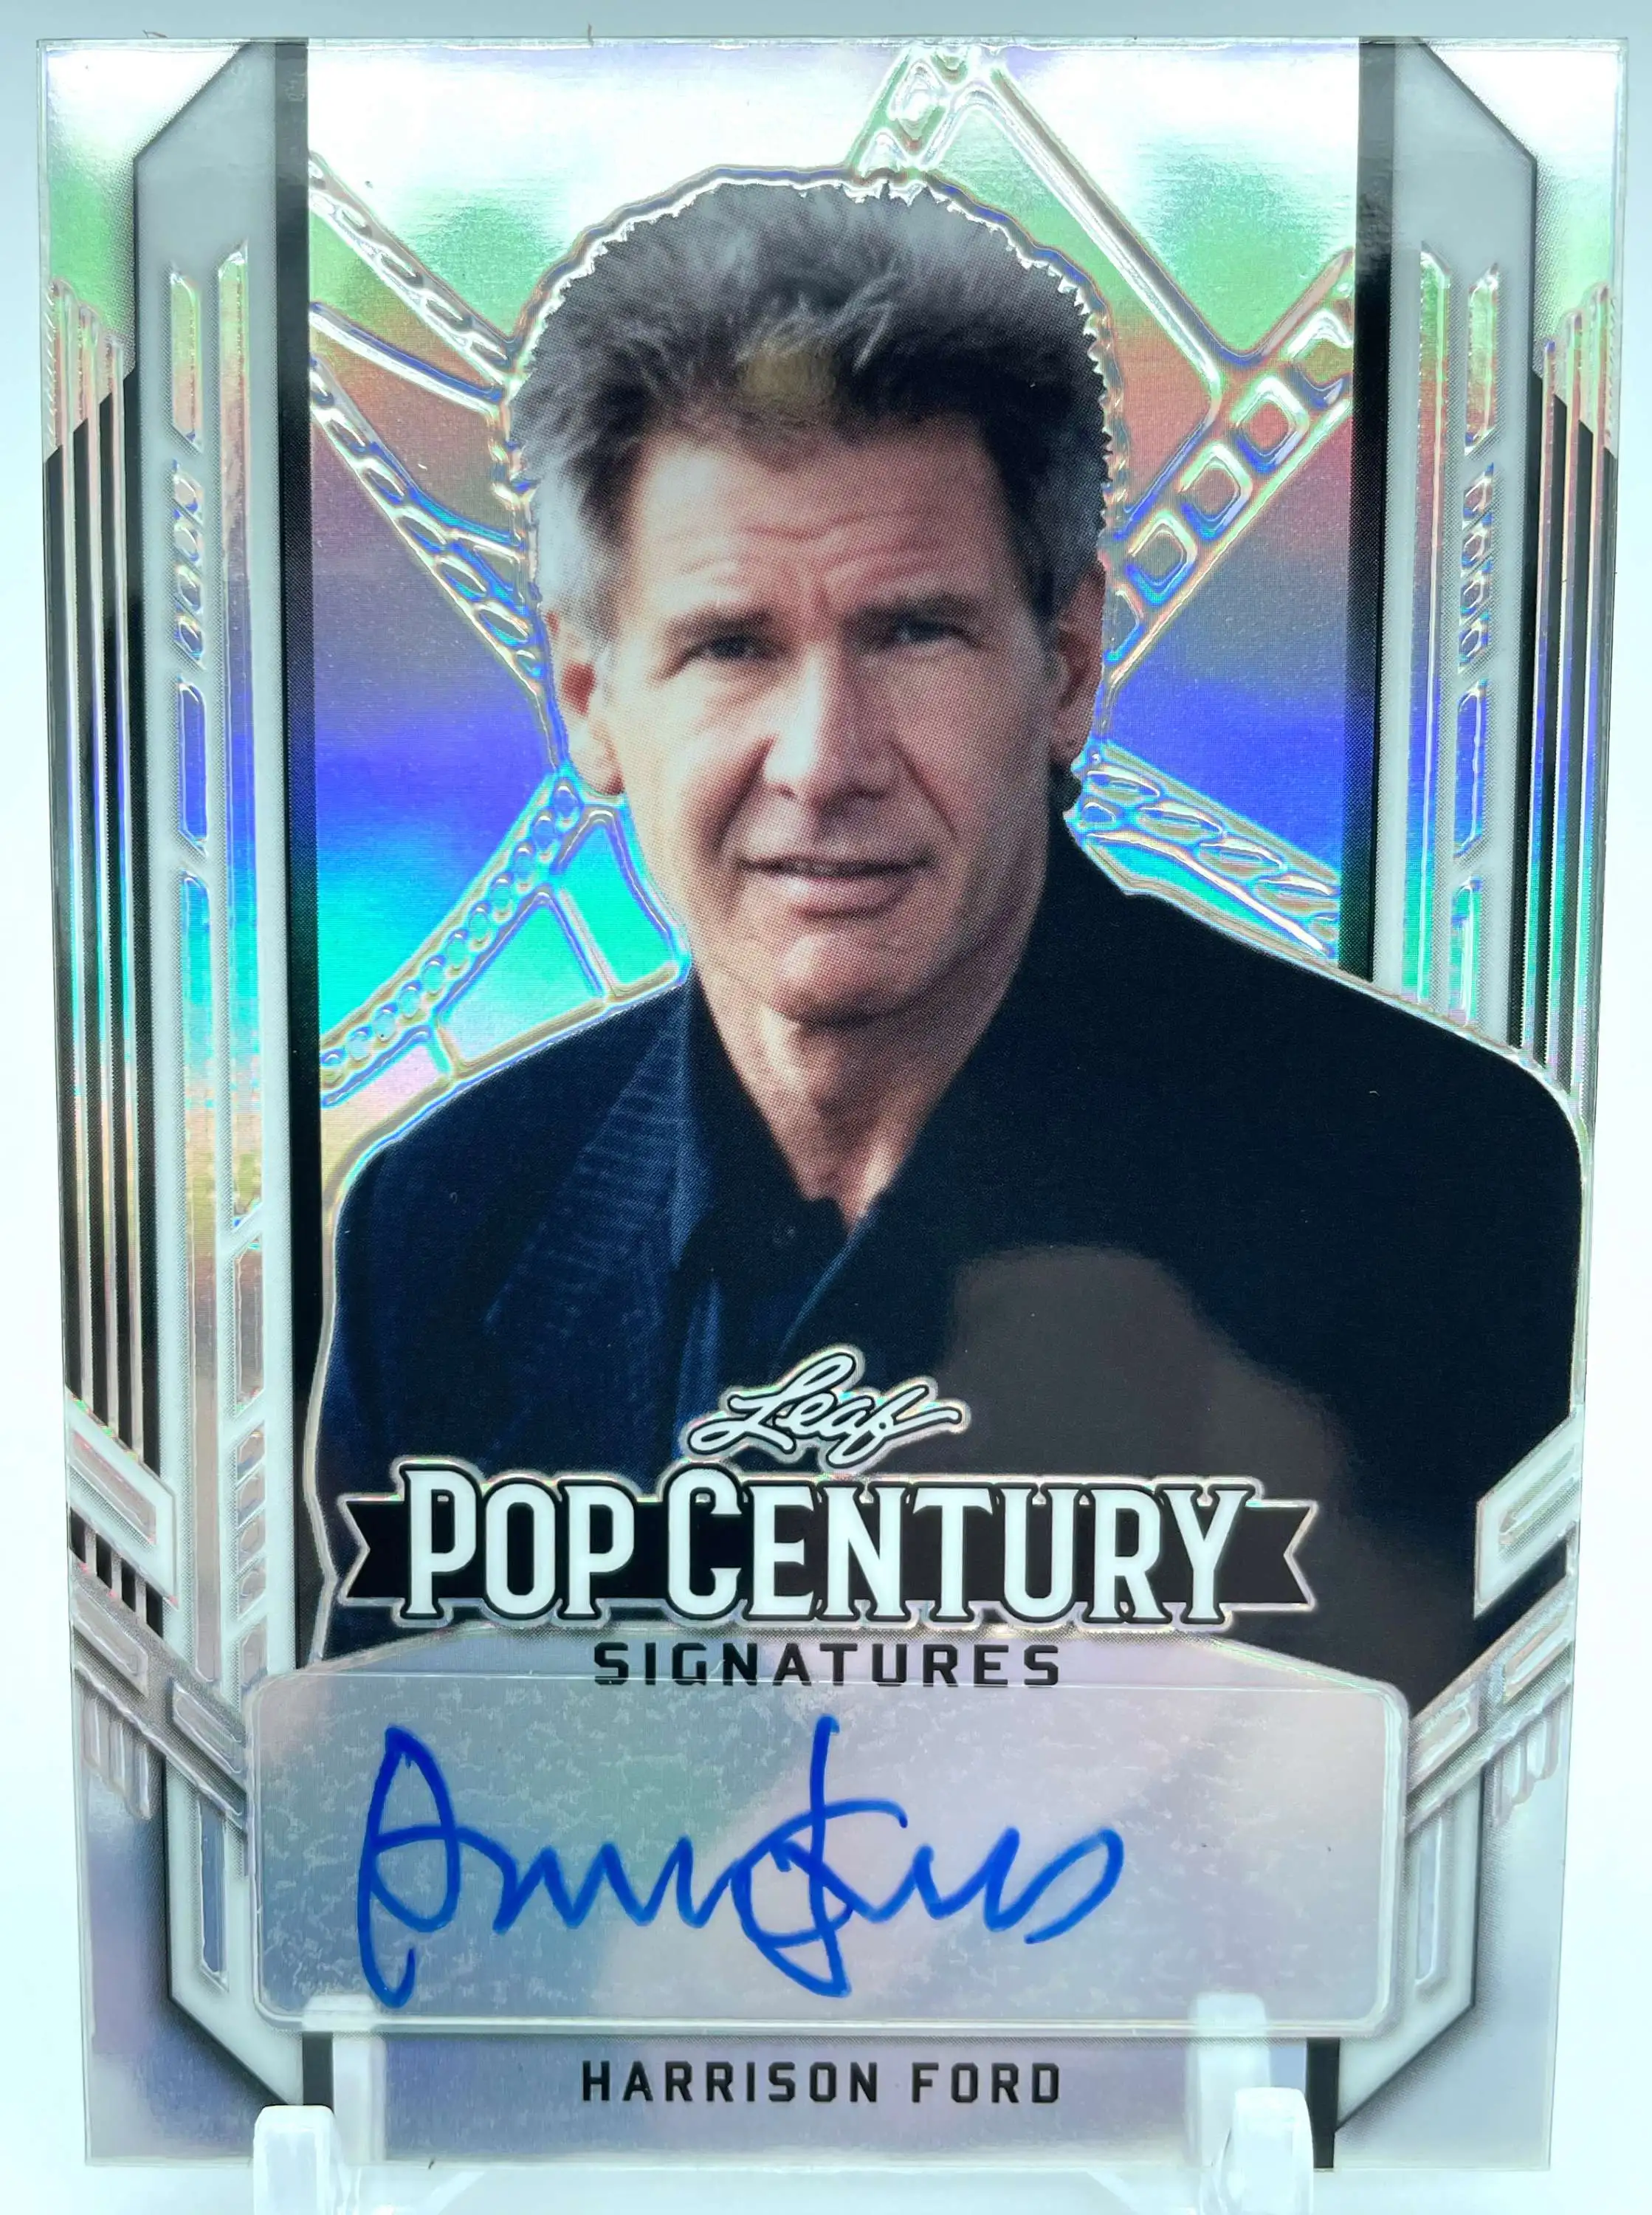 Leaf 2021 Pop Century Harrison Ford 38 Single Collectible Card BA 